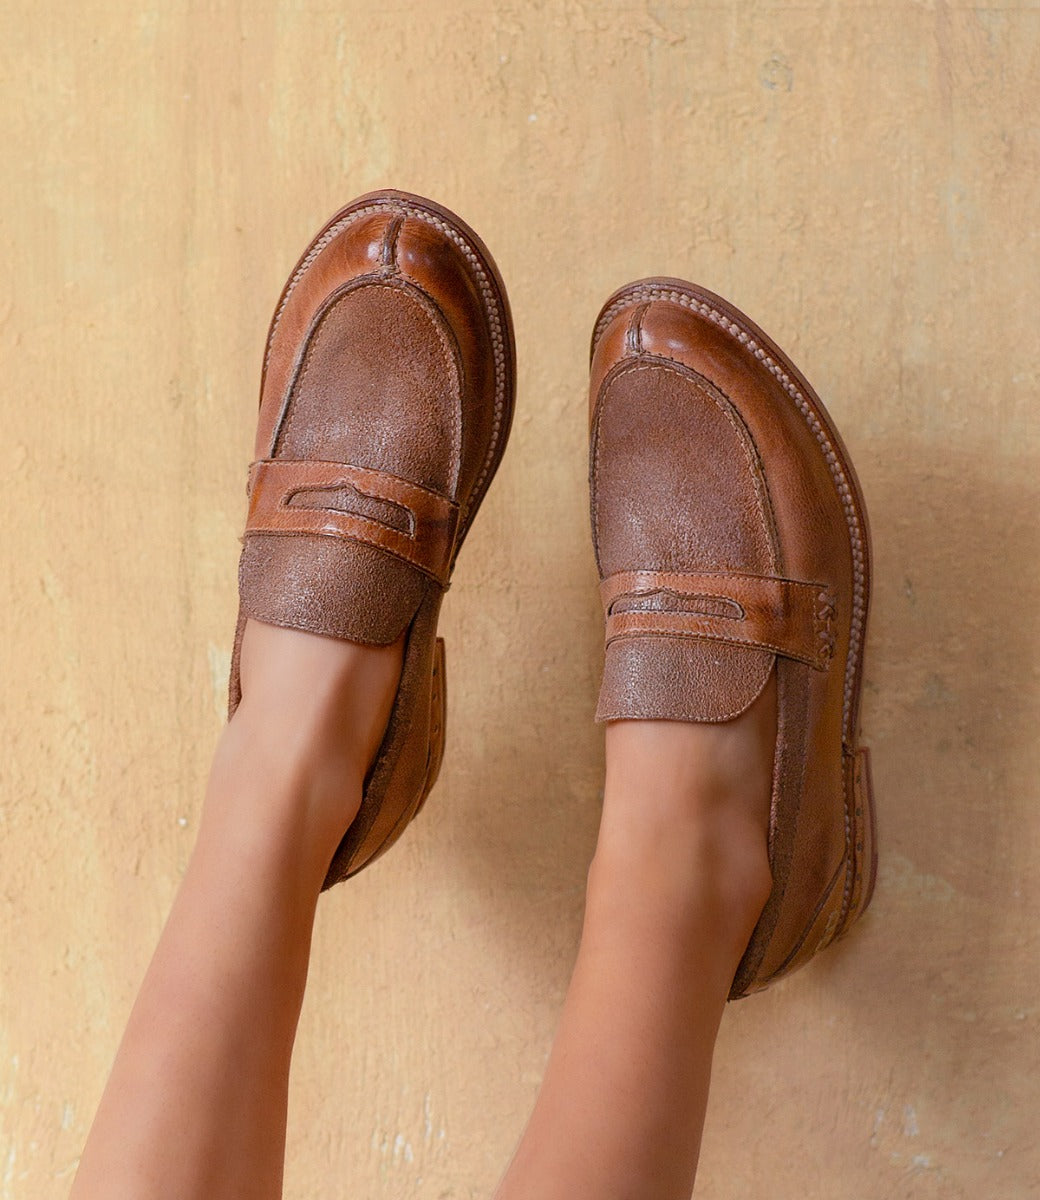 The legs of a woman wearing Bed Stu Reina brown loafers.